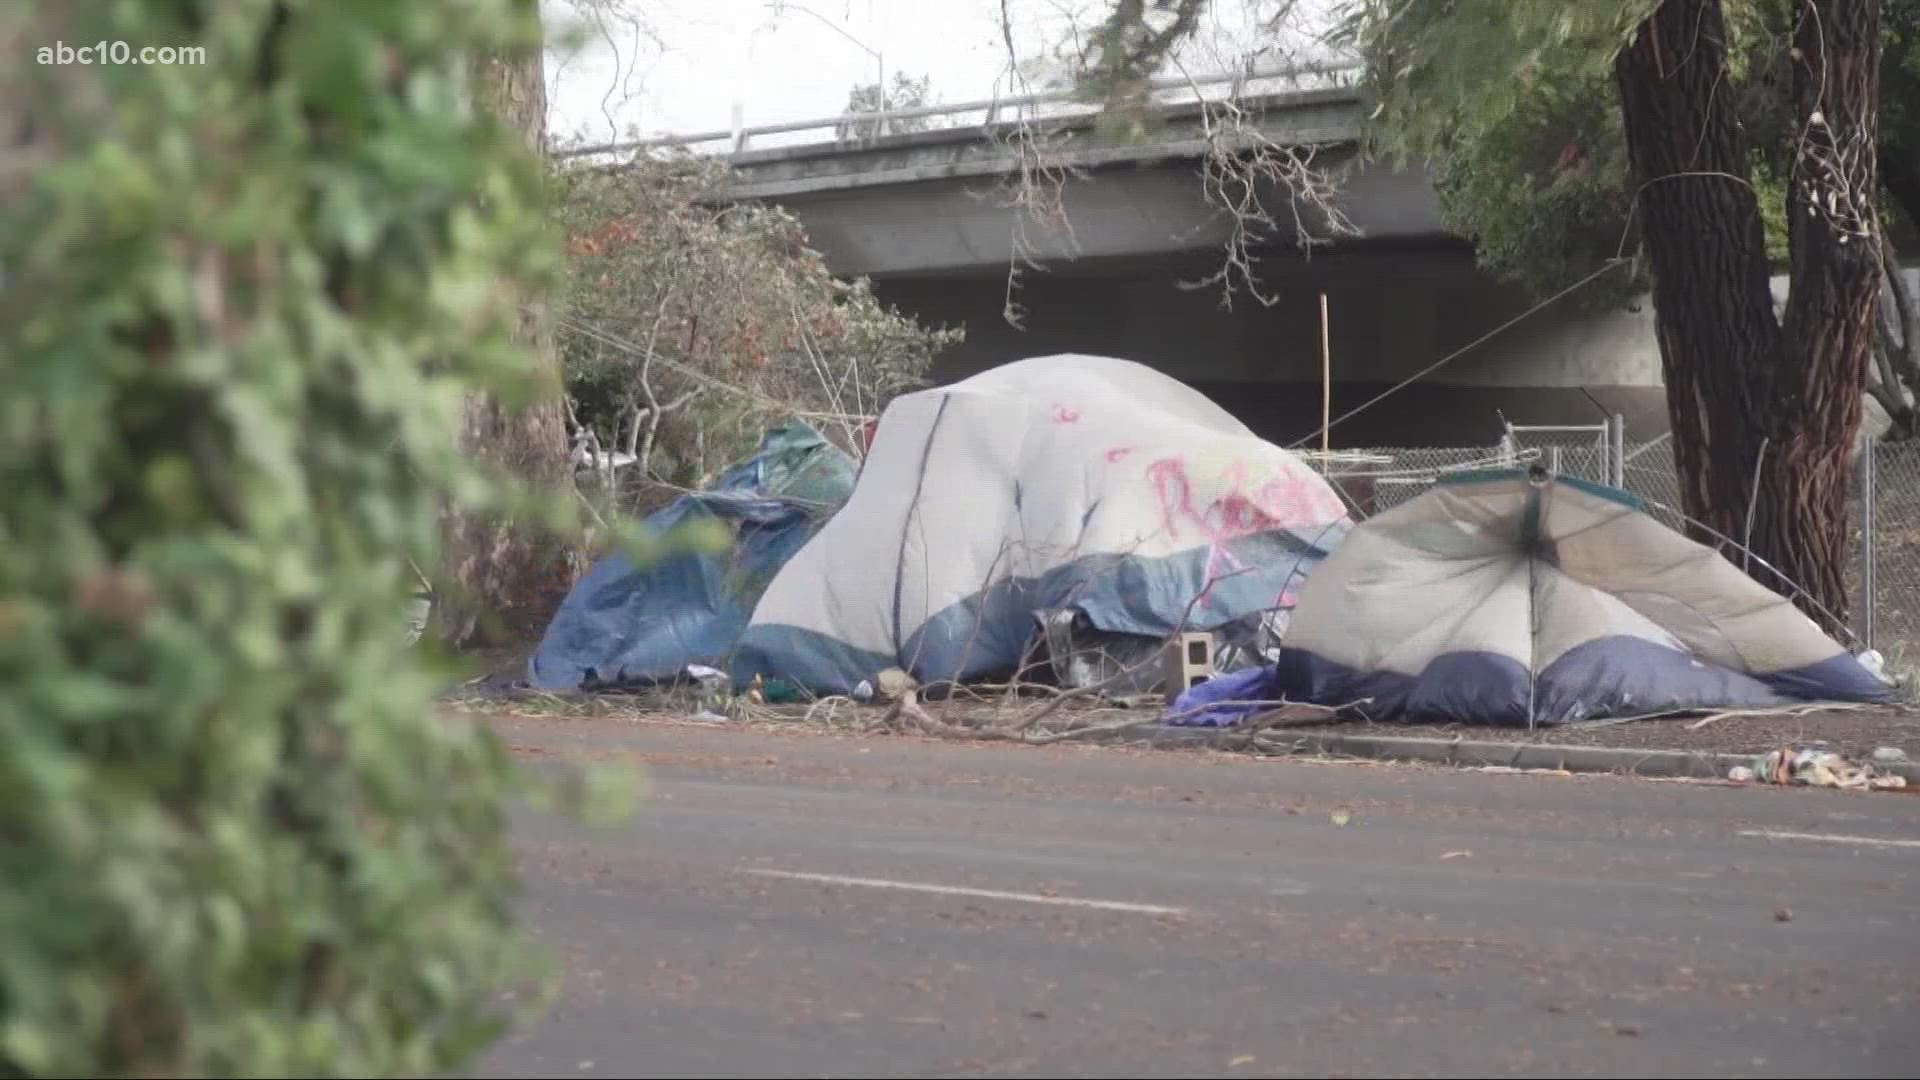 While Sacramento lawmakers recently opened a new navigation center for the city's homeless population, clearing of encampments continue amid the storm